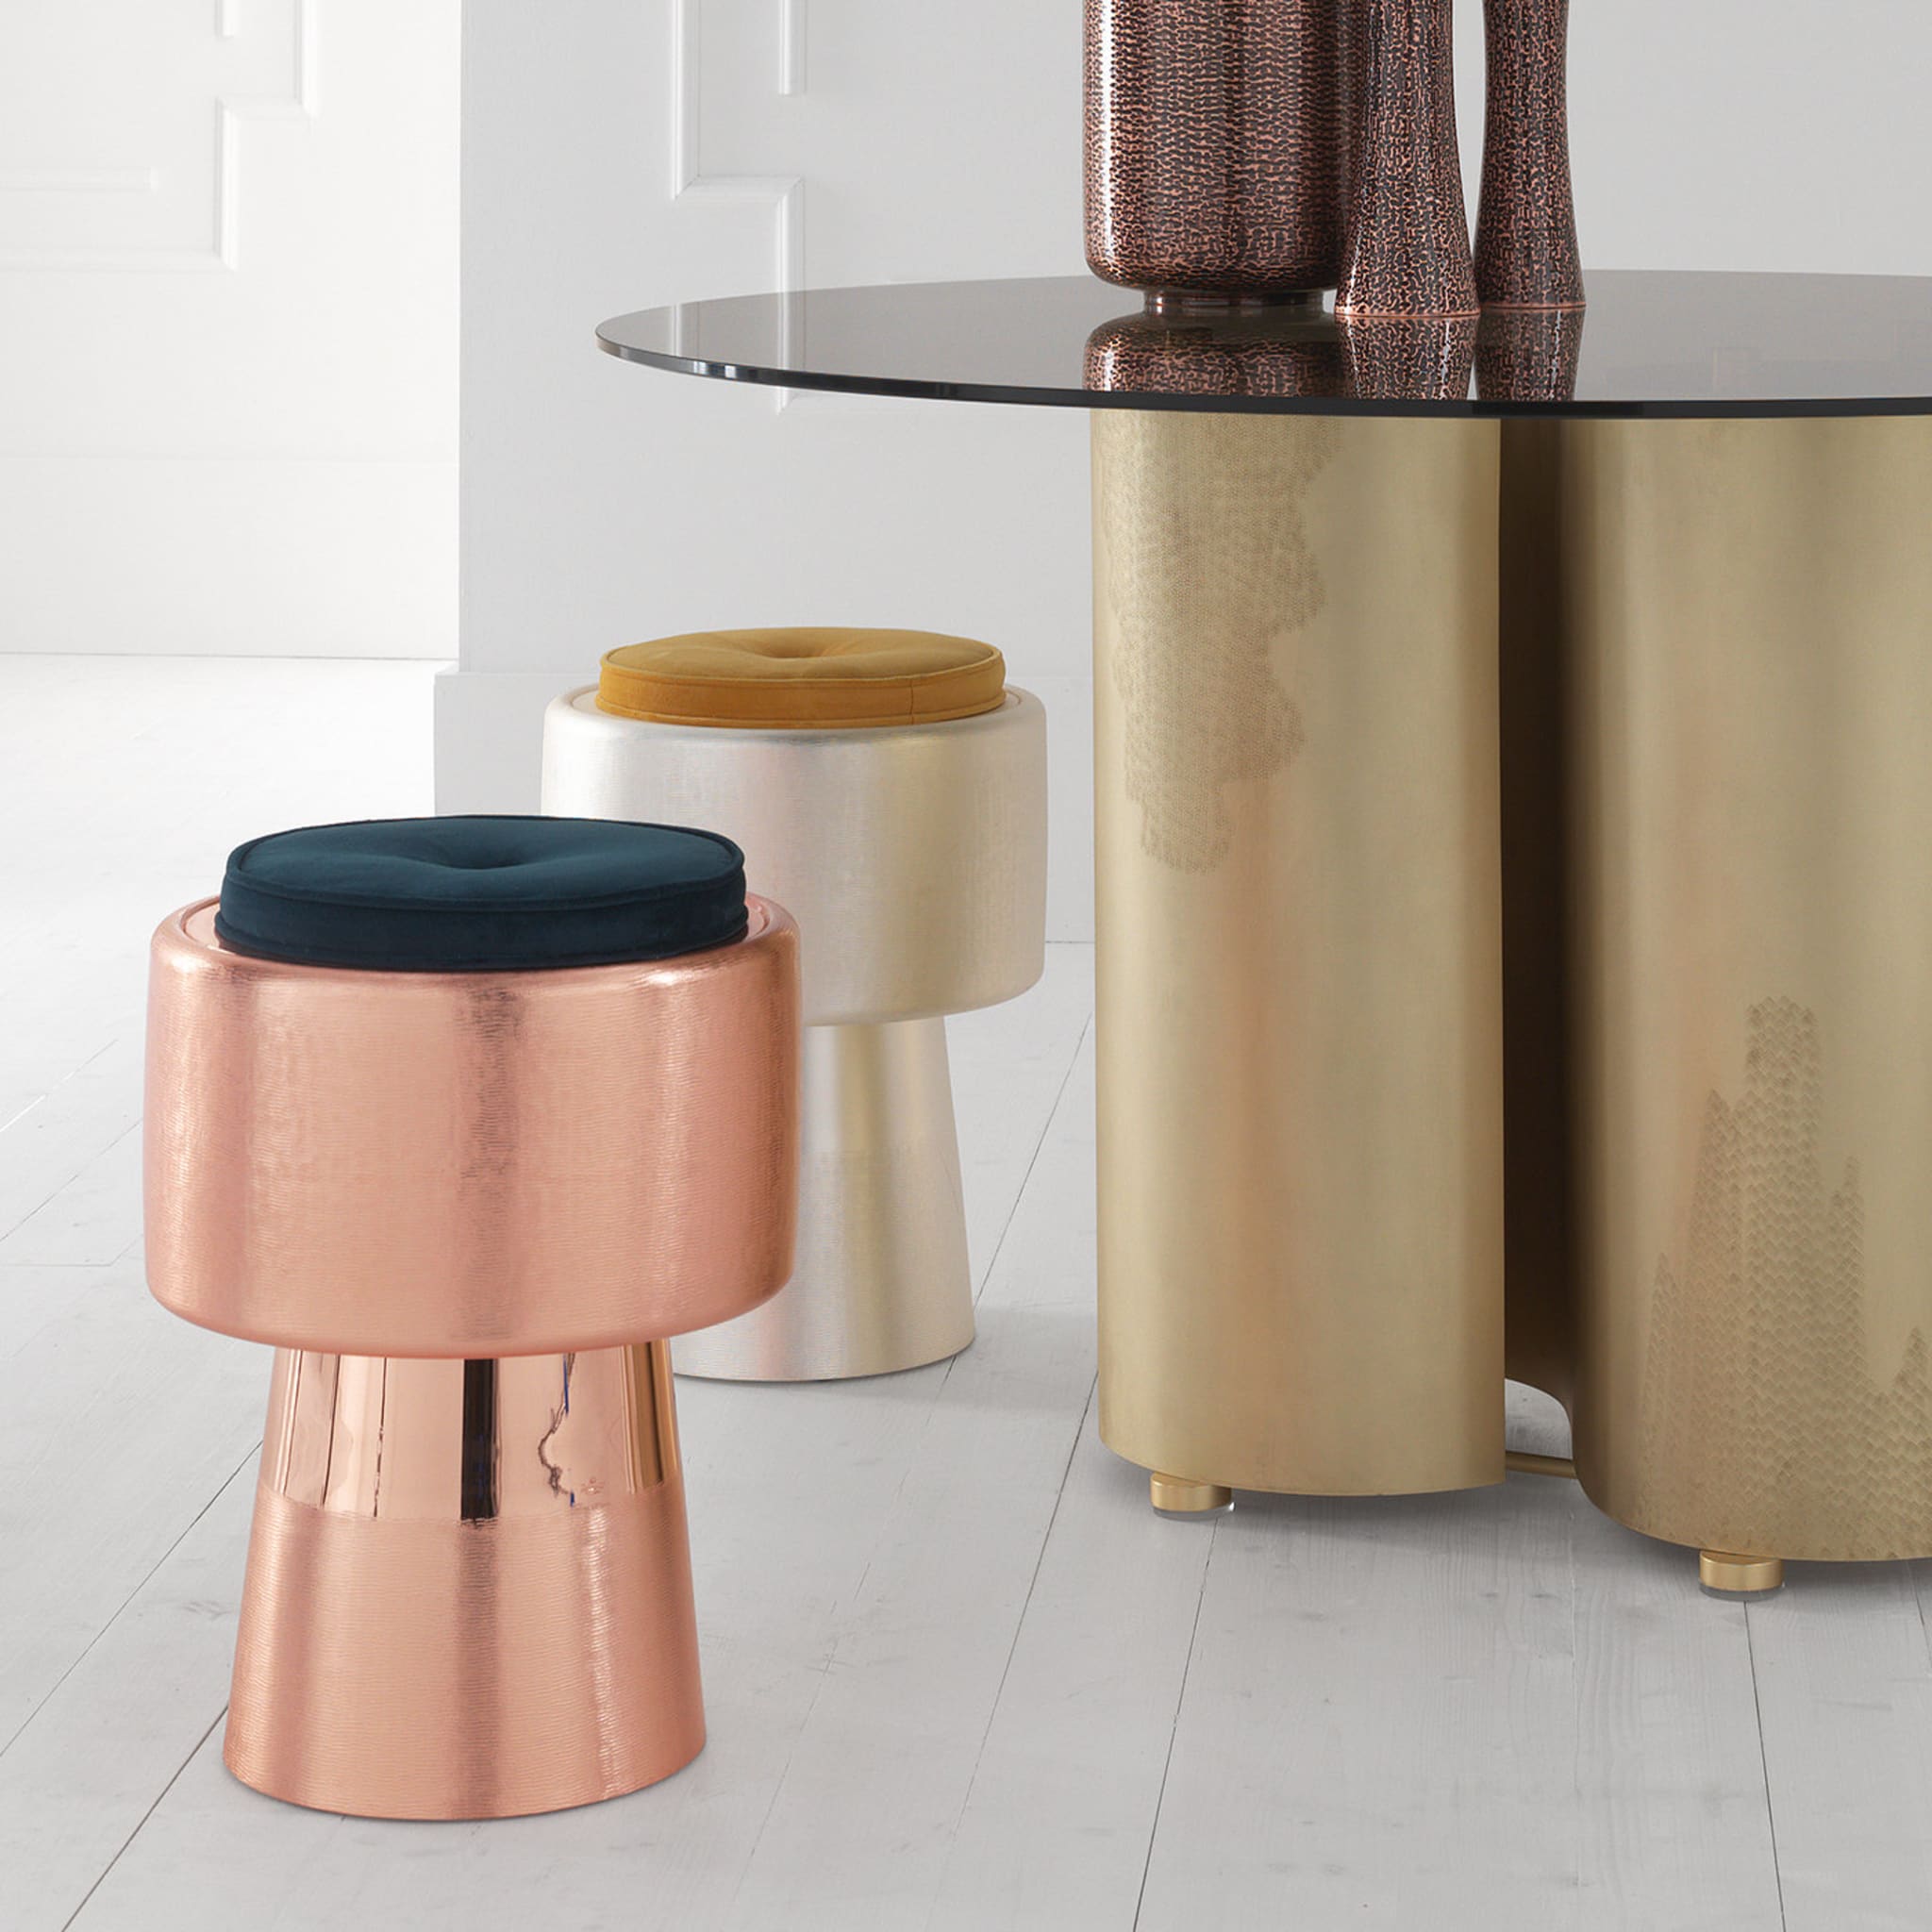 Tappo Bronze Stool by NOOII - Alternative view 2